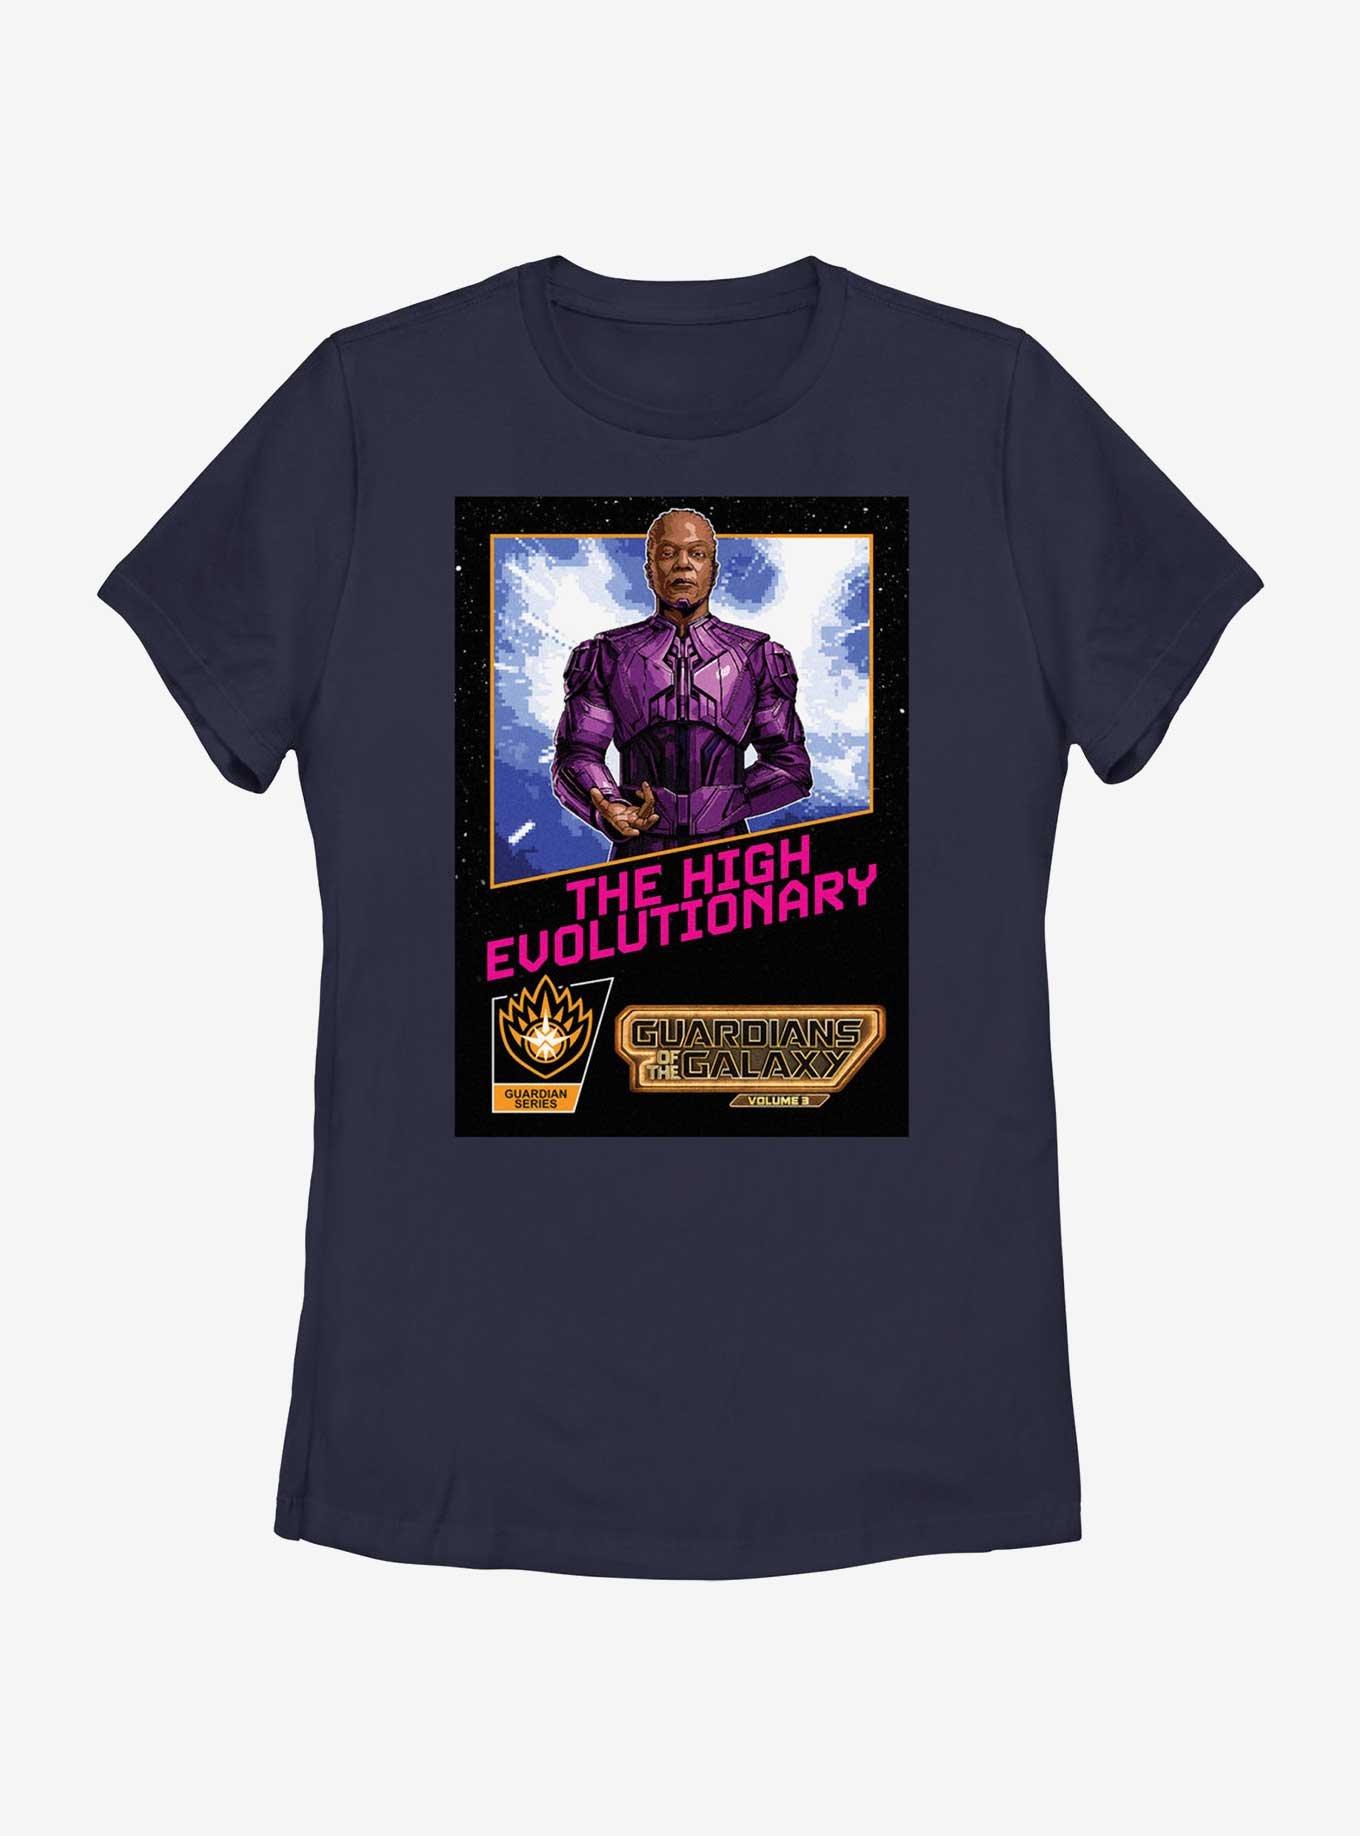 Marvel Guardians of the Galaxy Vol. 3 High Evolutionary Cosmic Poster Womens T-Shirt, NAVY, hi-res